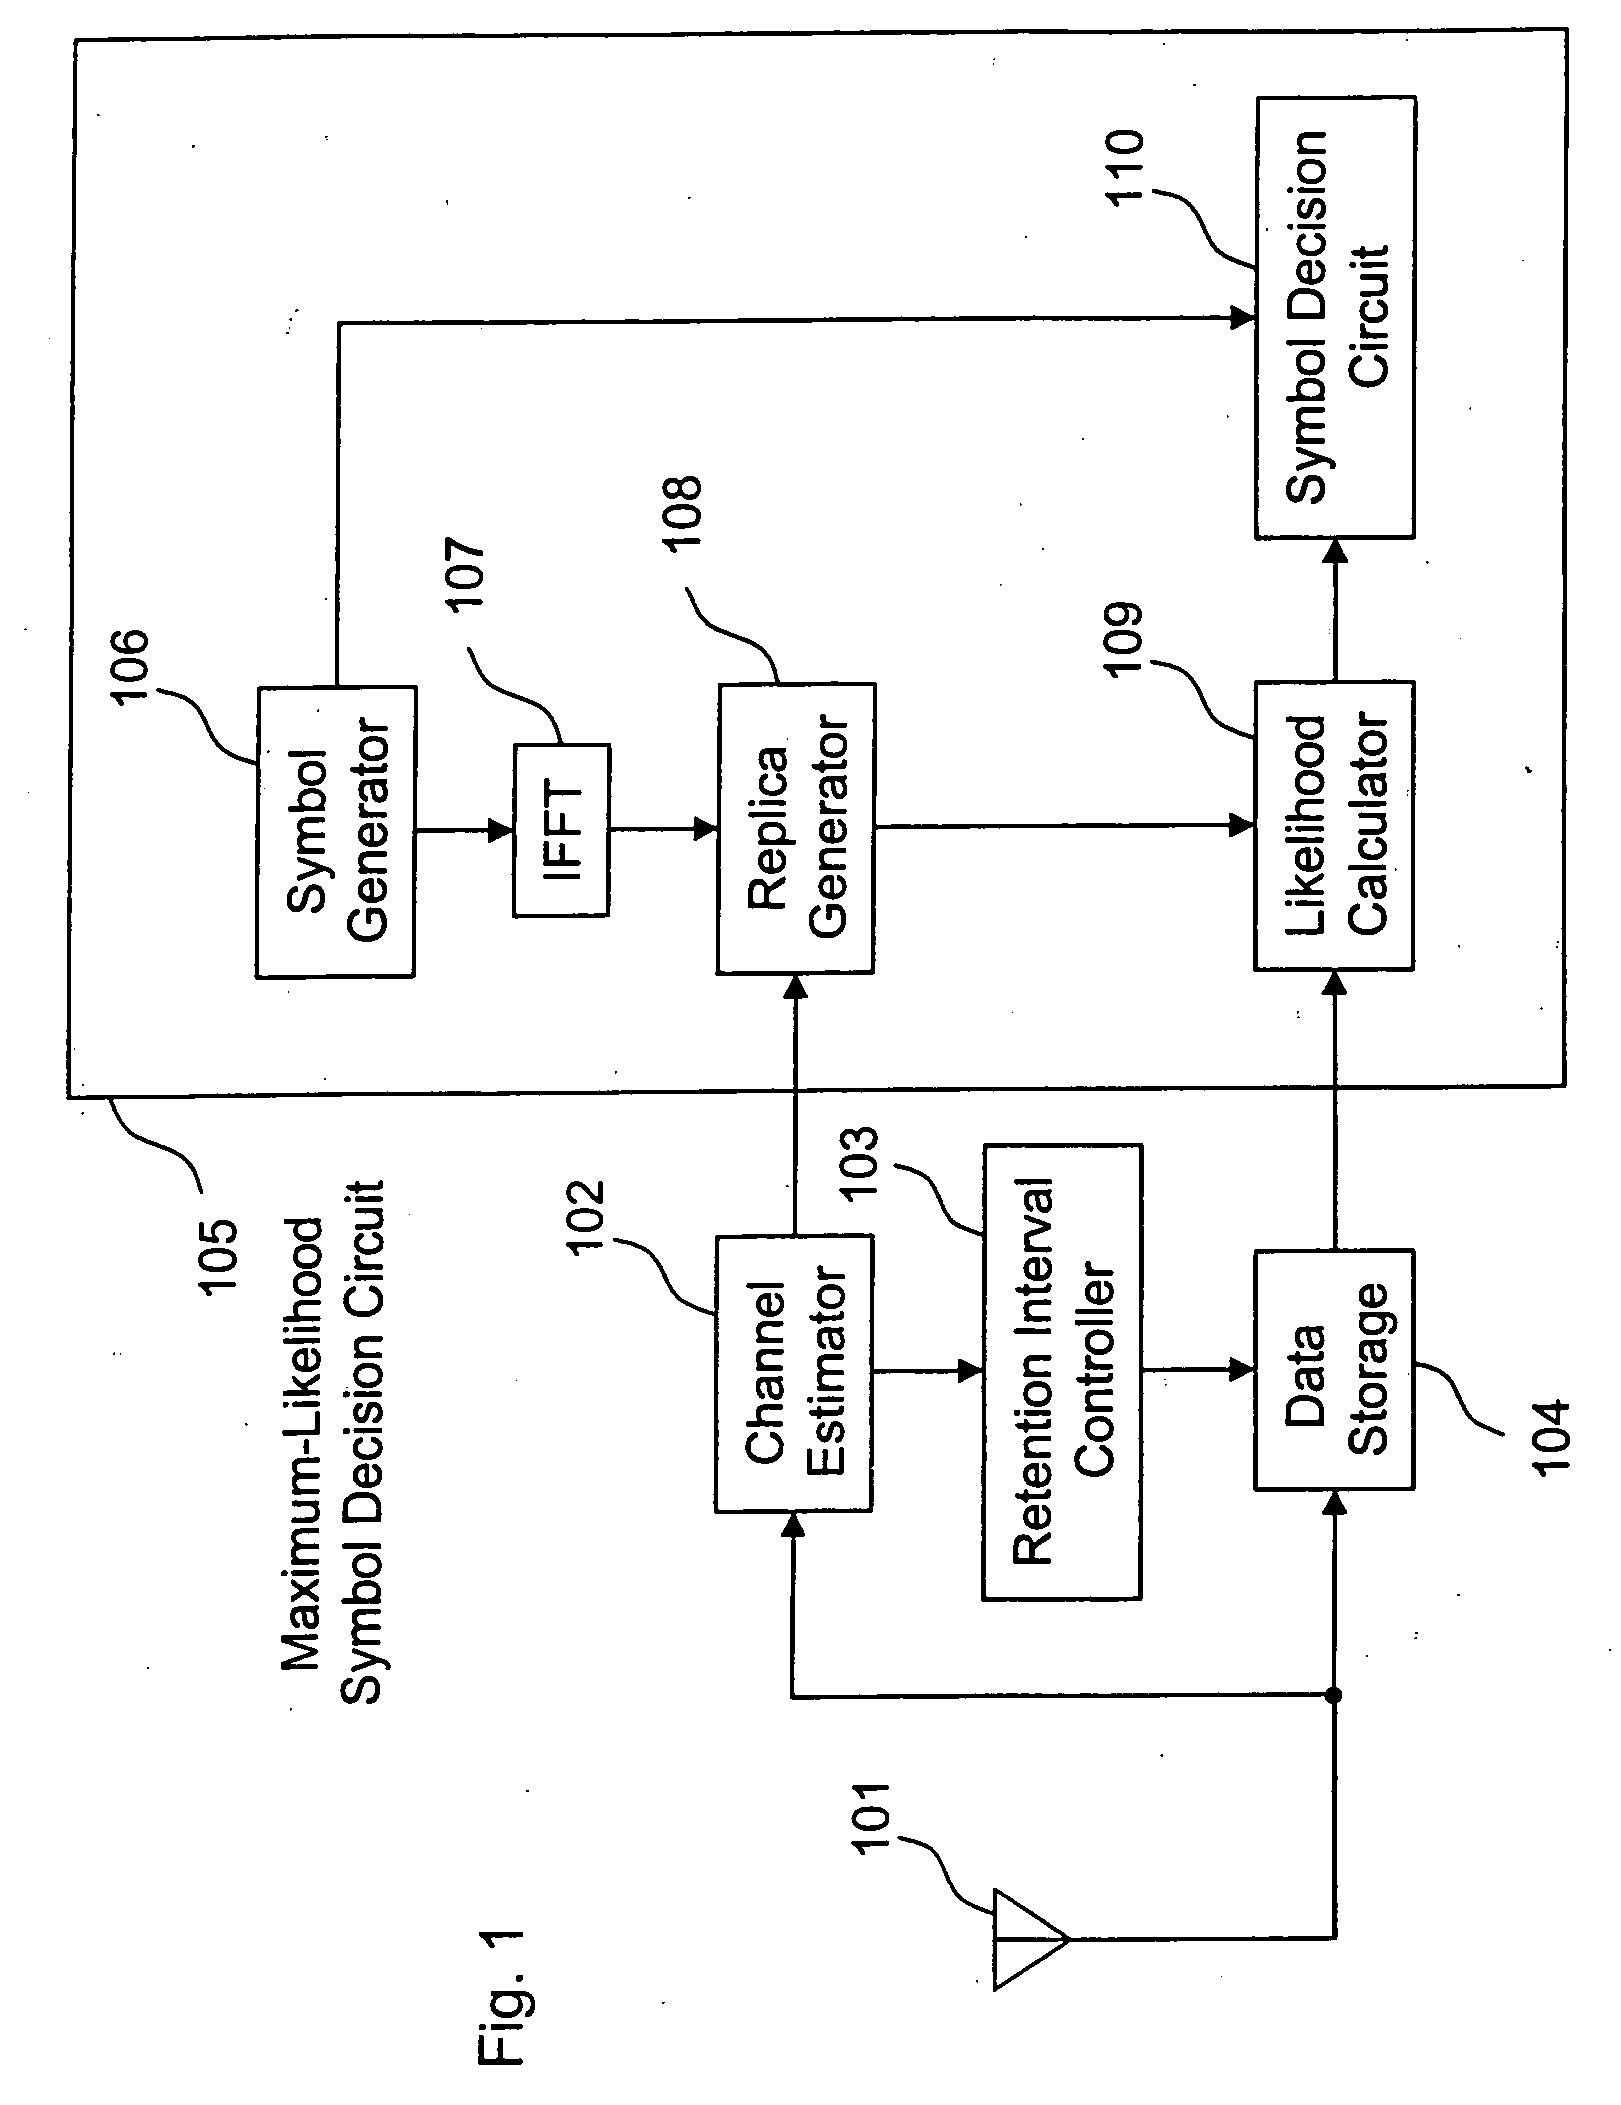 Orthogonal frequency division demodulator, method and computer program product